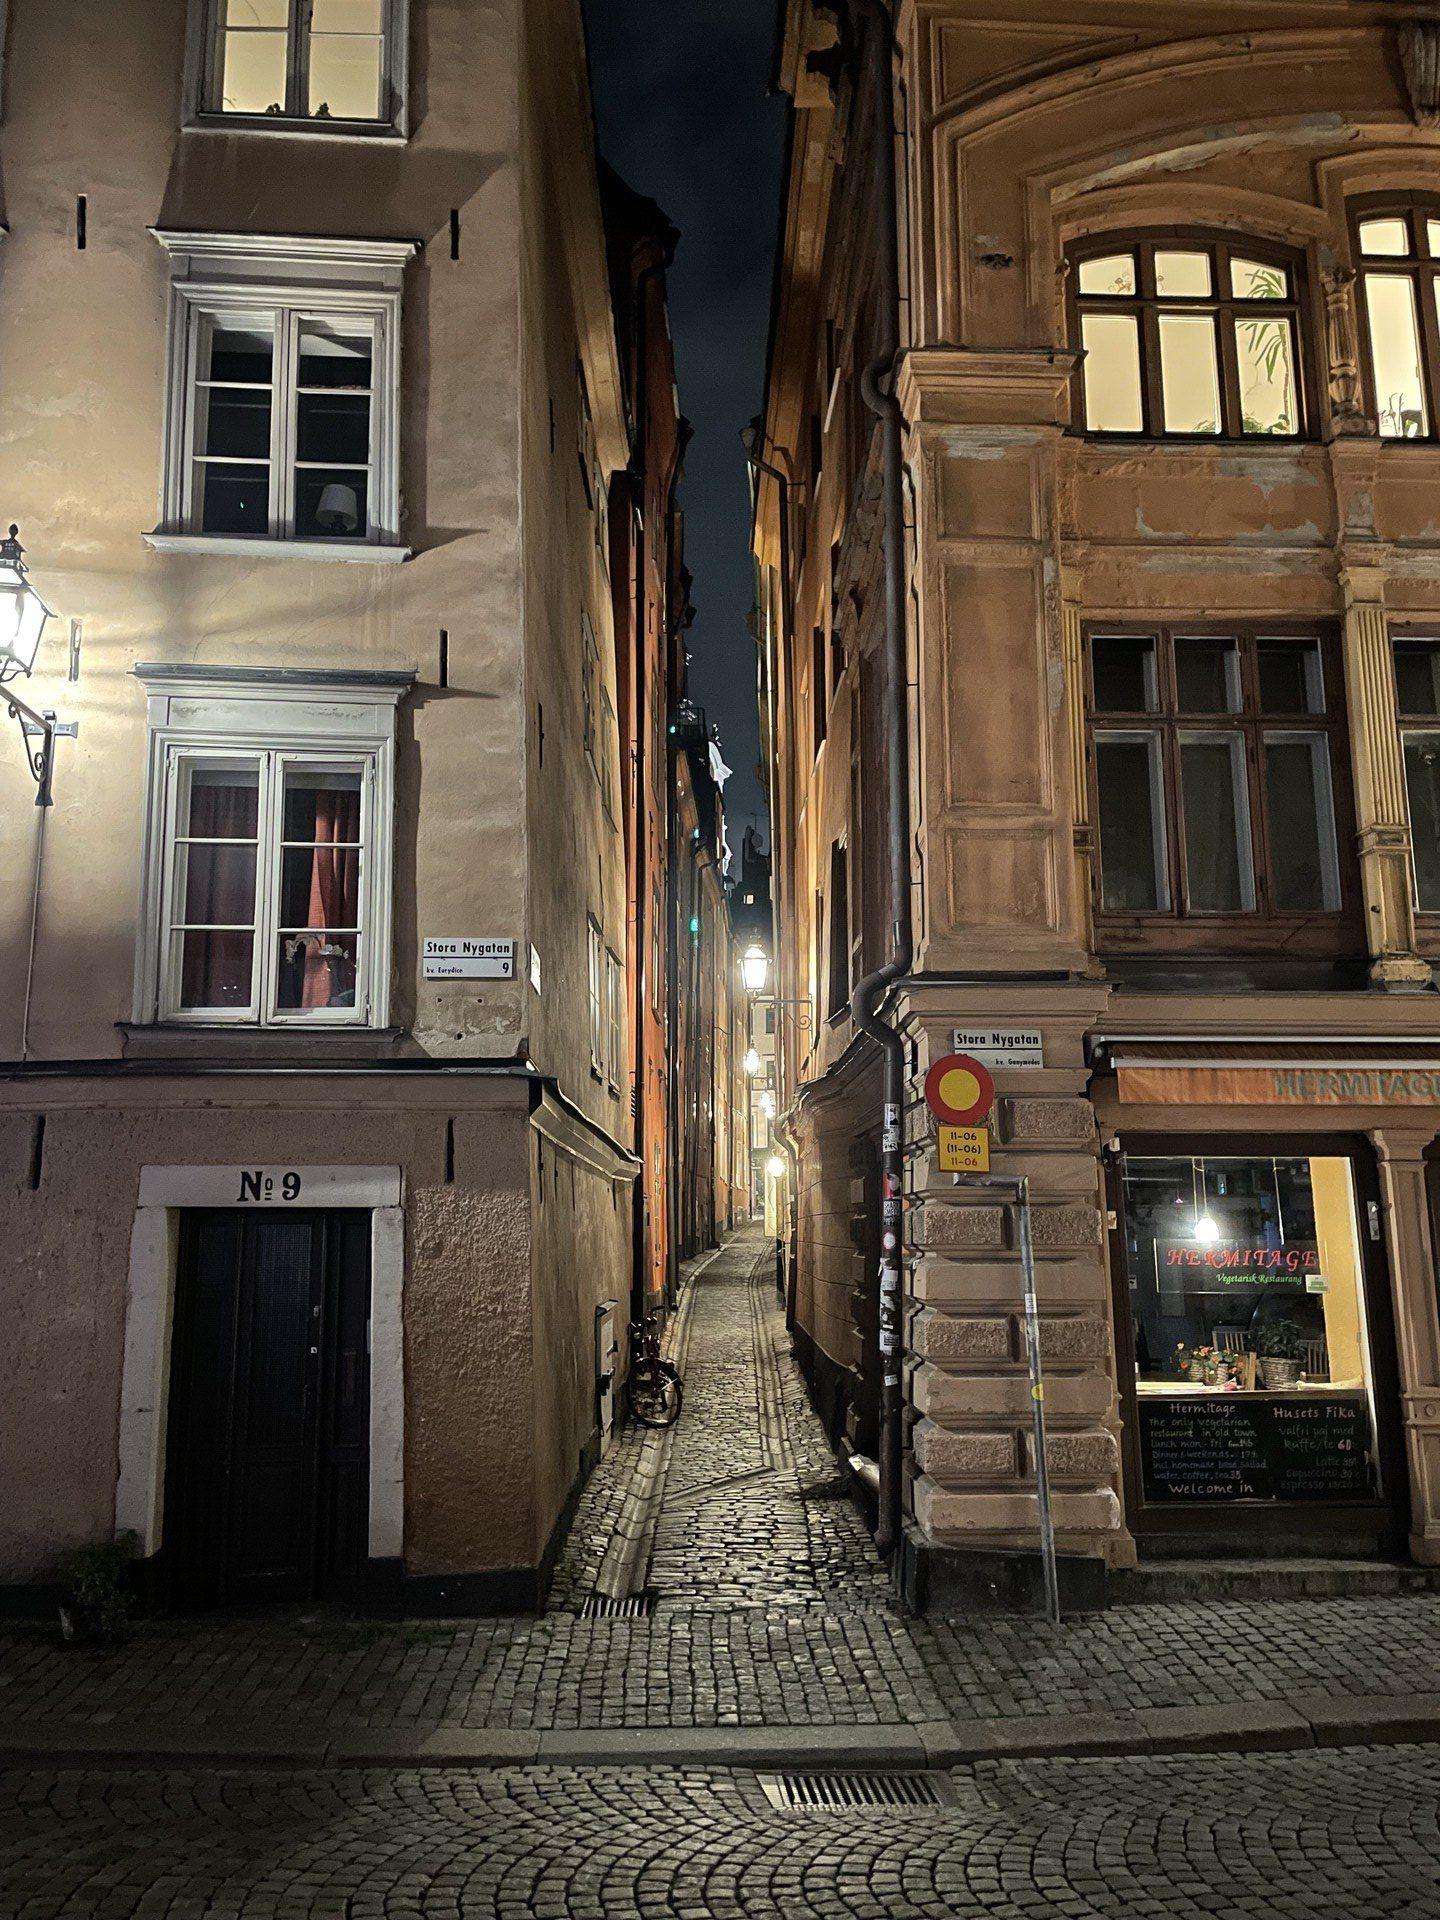 An alley in Gamla Stan, cobblestoned and narrow but tidy and well-lit.